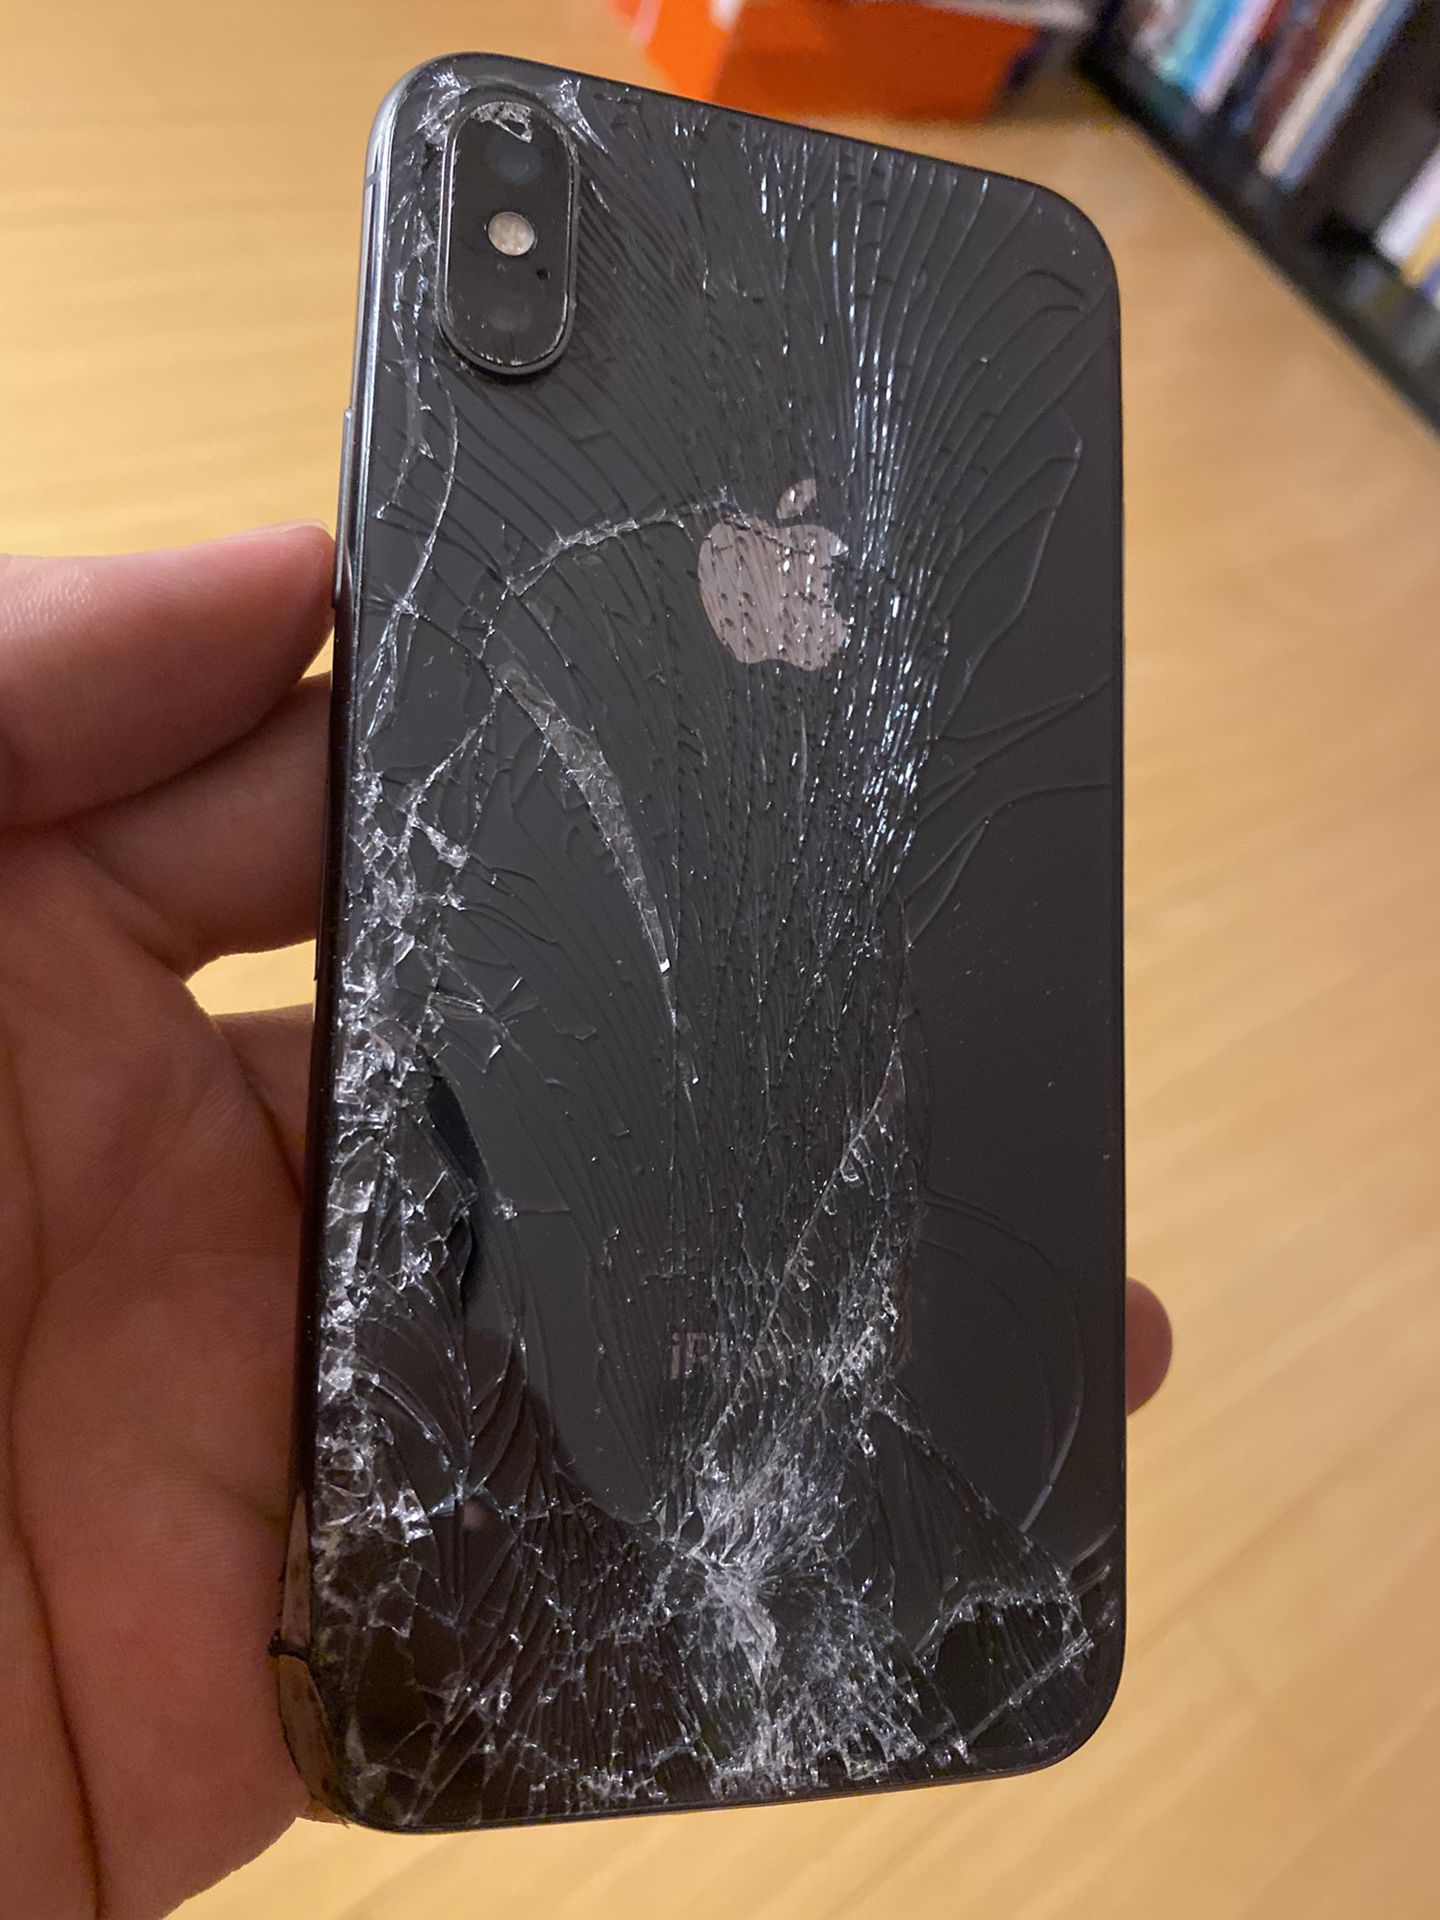 IPhone X Cracked Screen - For Parts Only